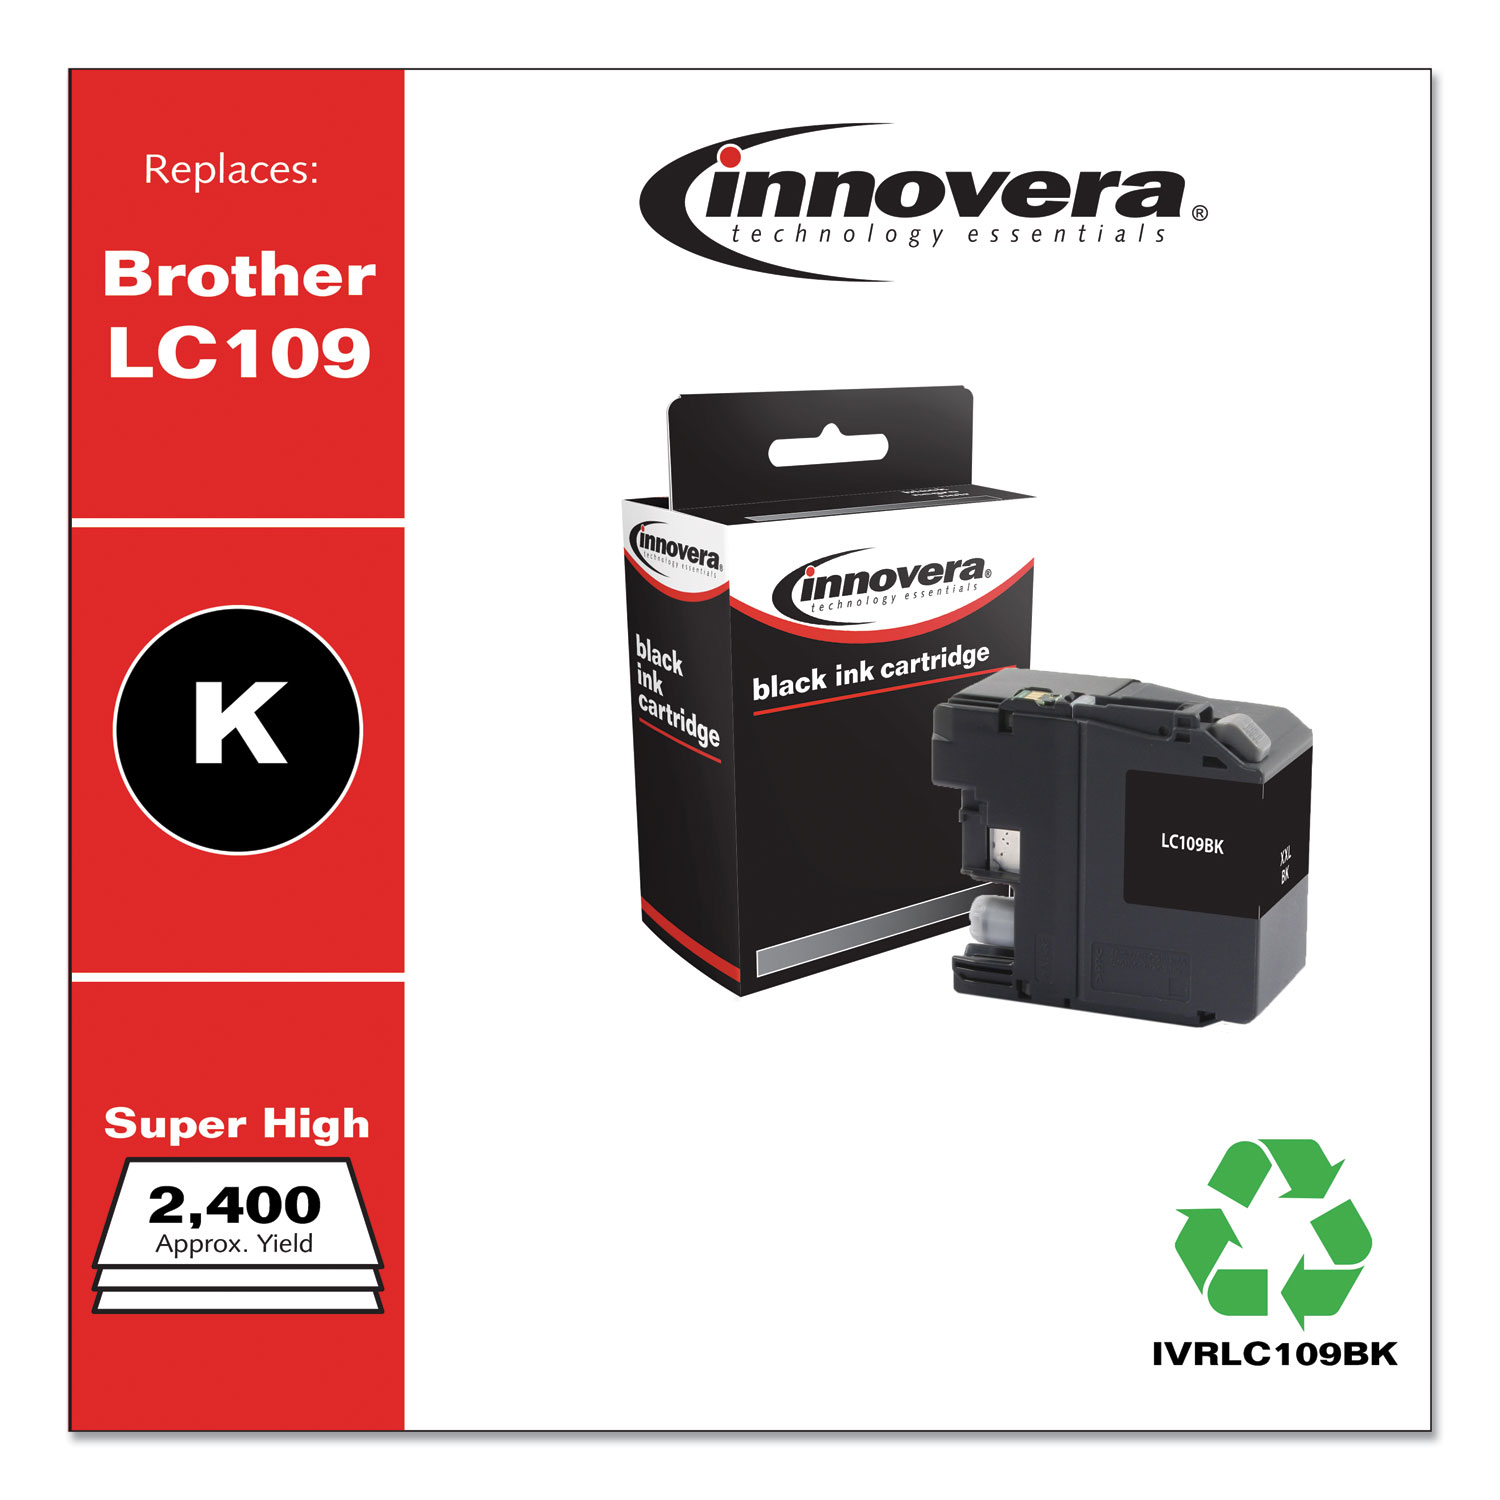  Innovera IVRLC109BK Remanufactured Black Super High-Yield, Replacement for Brother LC109BK, 2,400 Page-Yield (IVRLC109BK) 